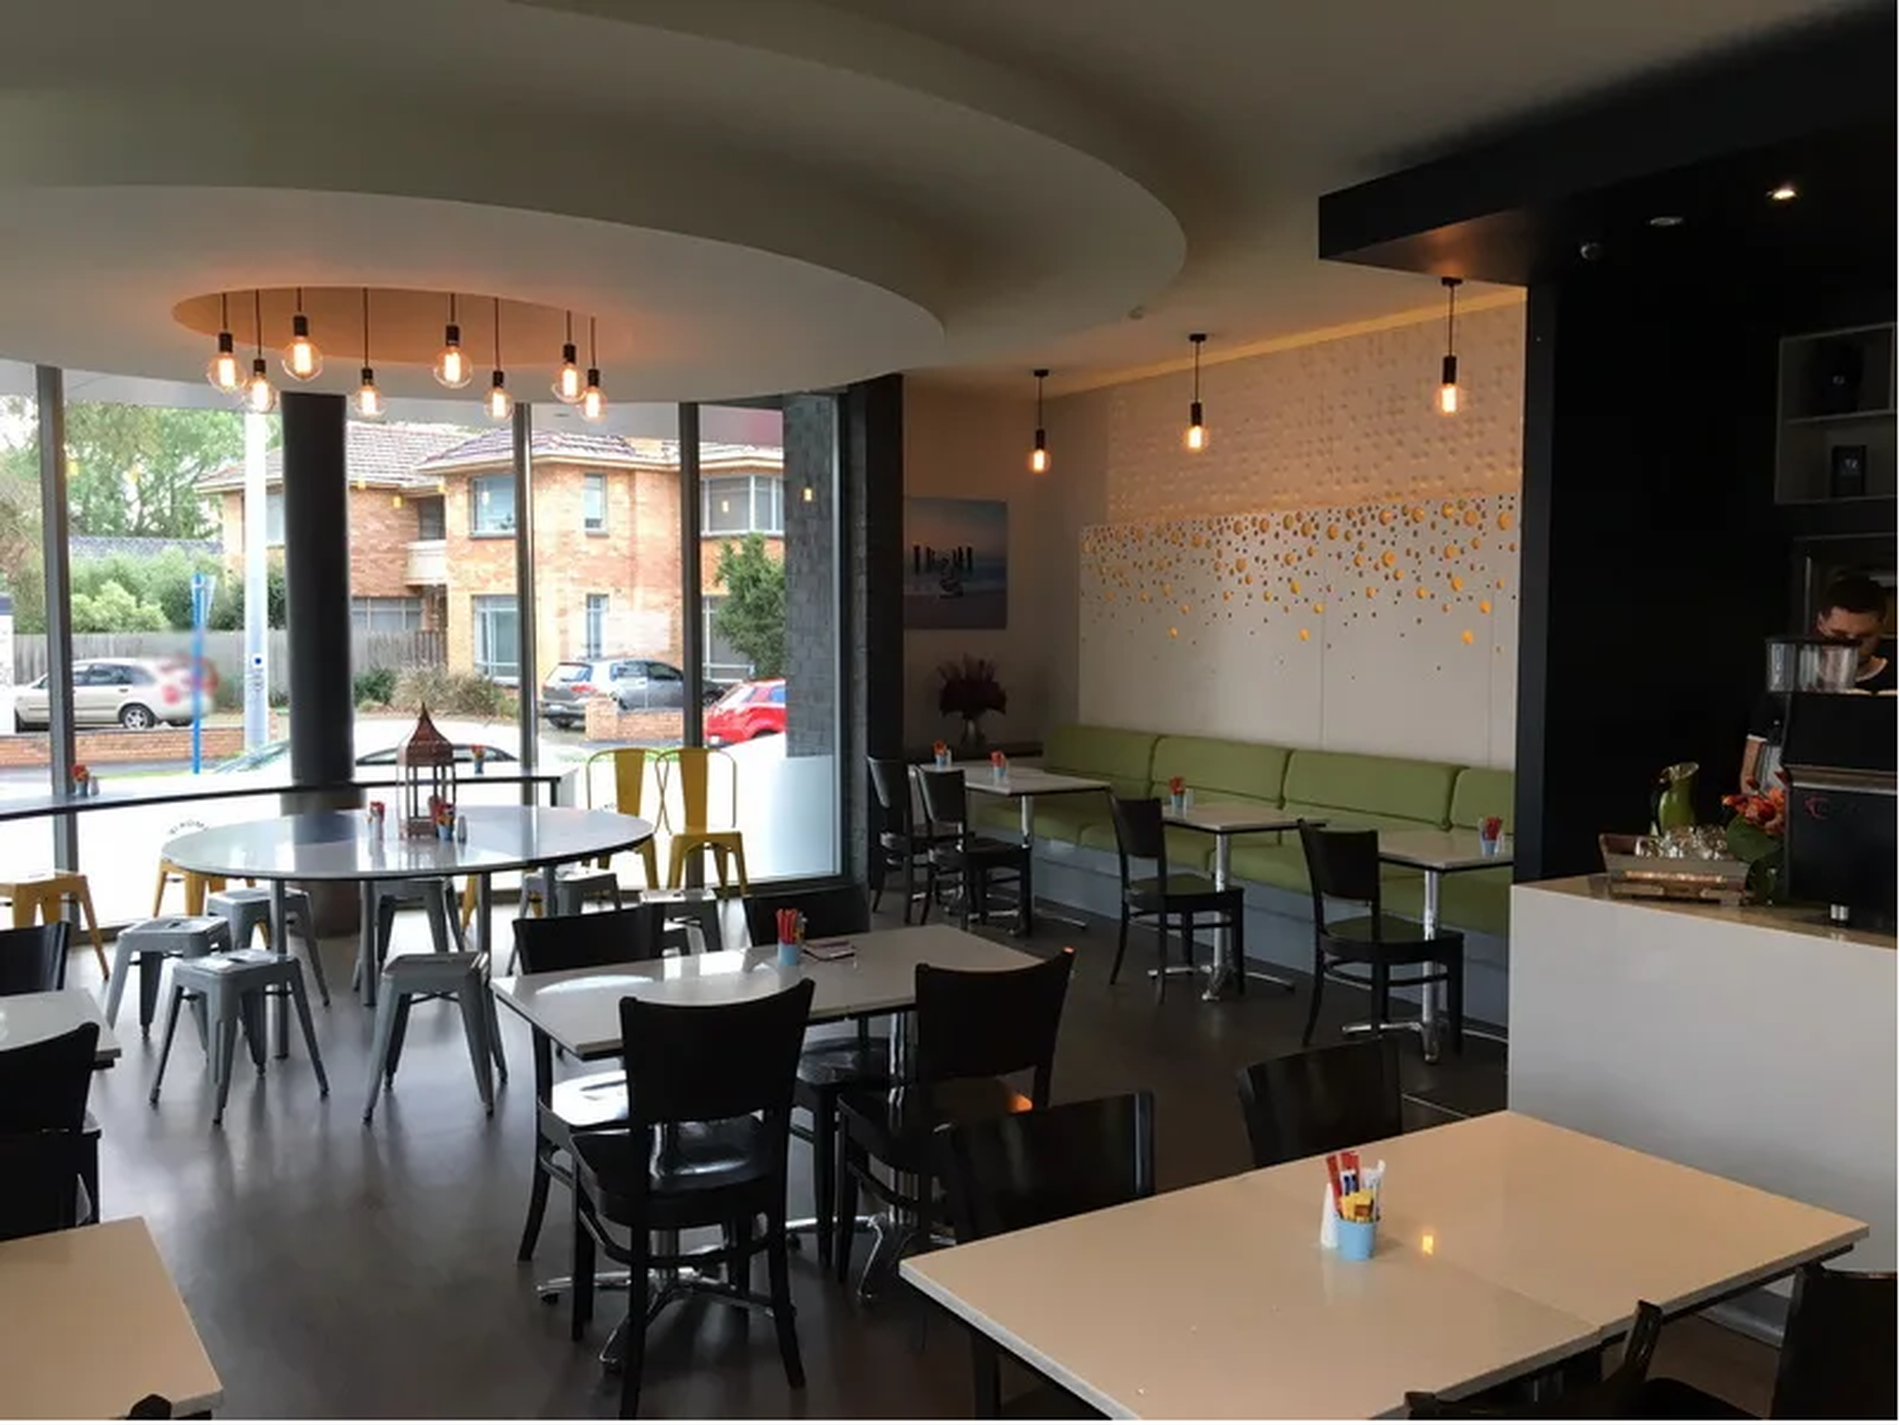 SOLD - 5 Day Cafe Business for sale in Brighton